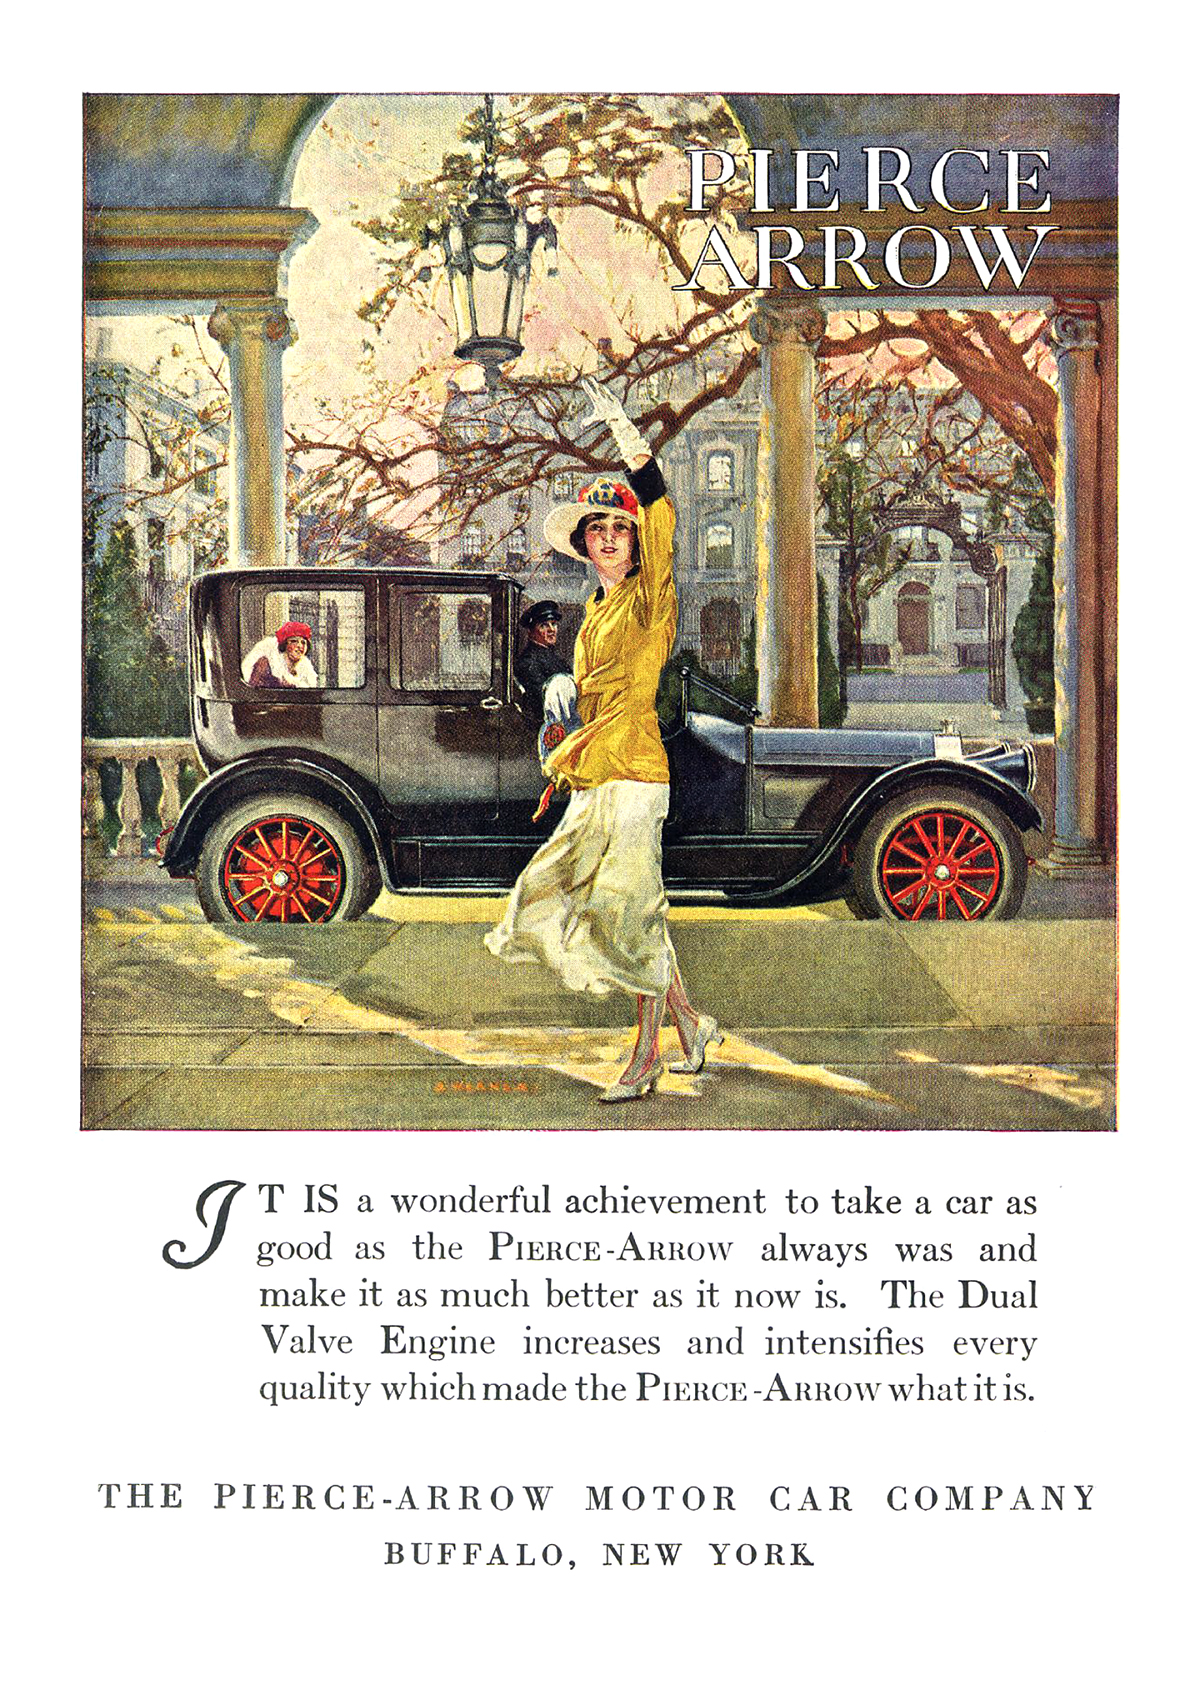 Pierce-Arrow Ad (October, 1918) – Illustrated by Simon Werner